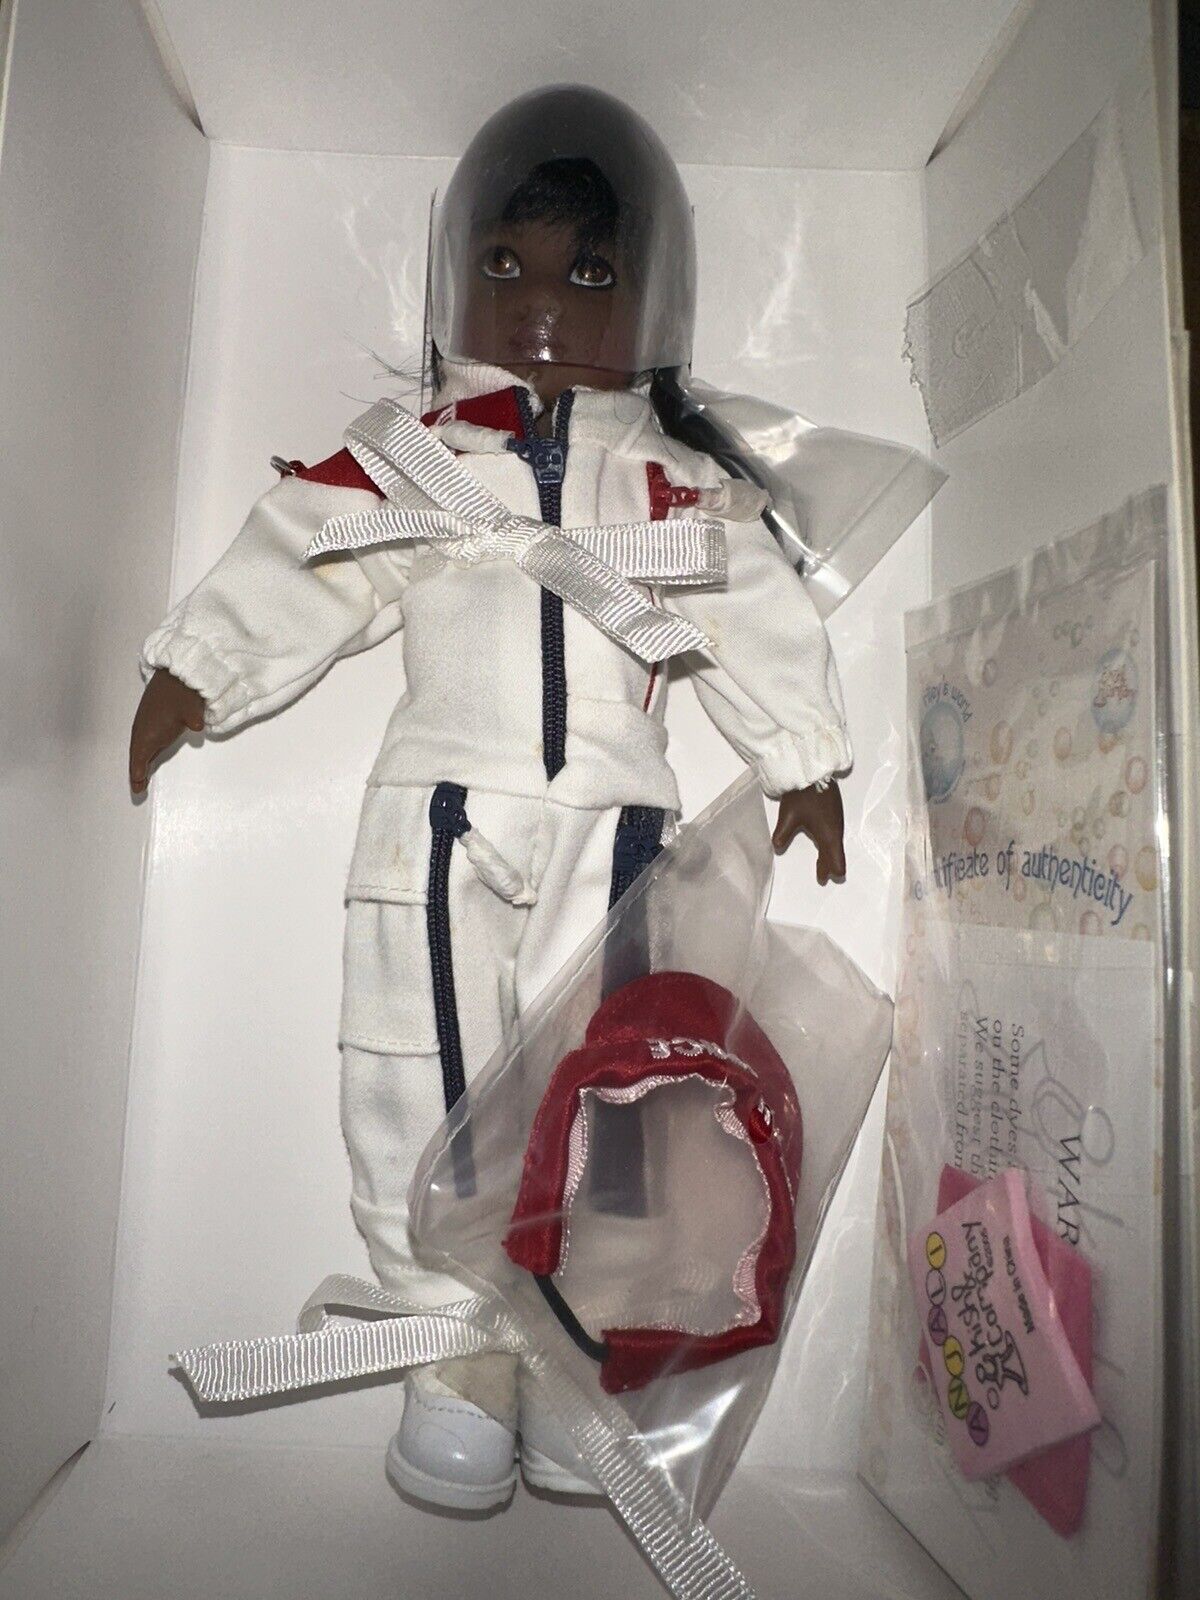 Kish Anjali Girls in Space Doll (Suit has stains on it)